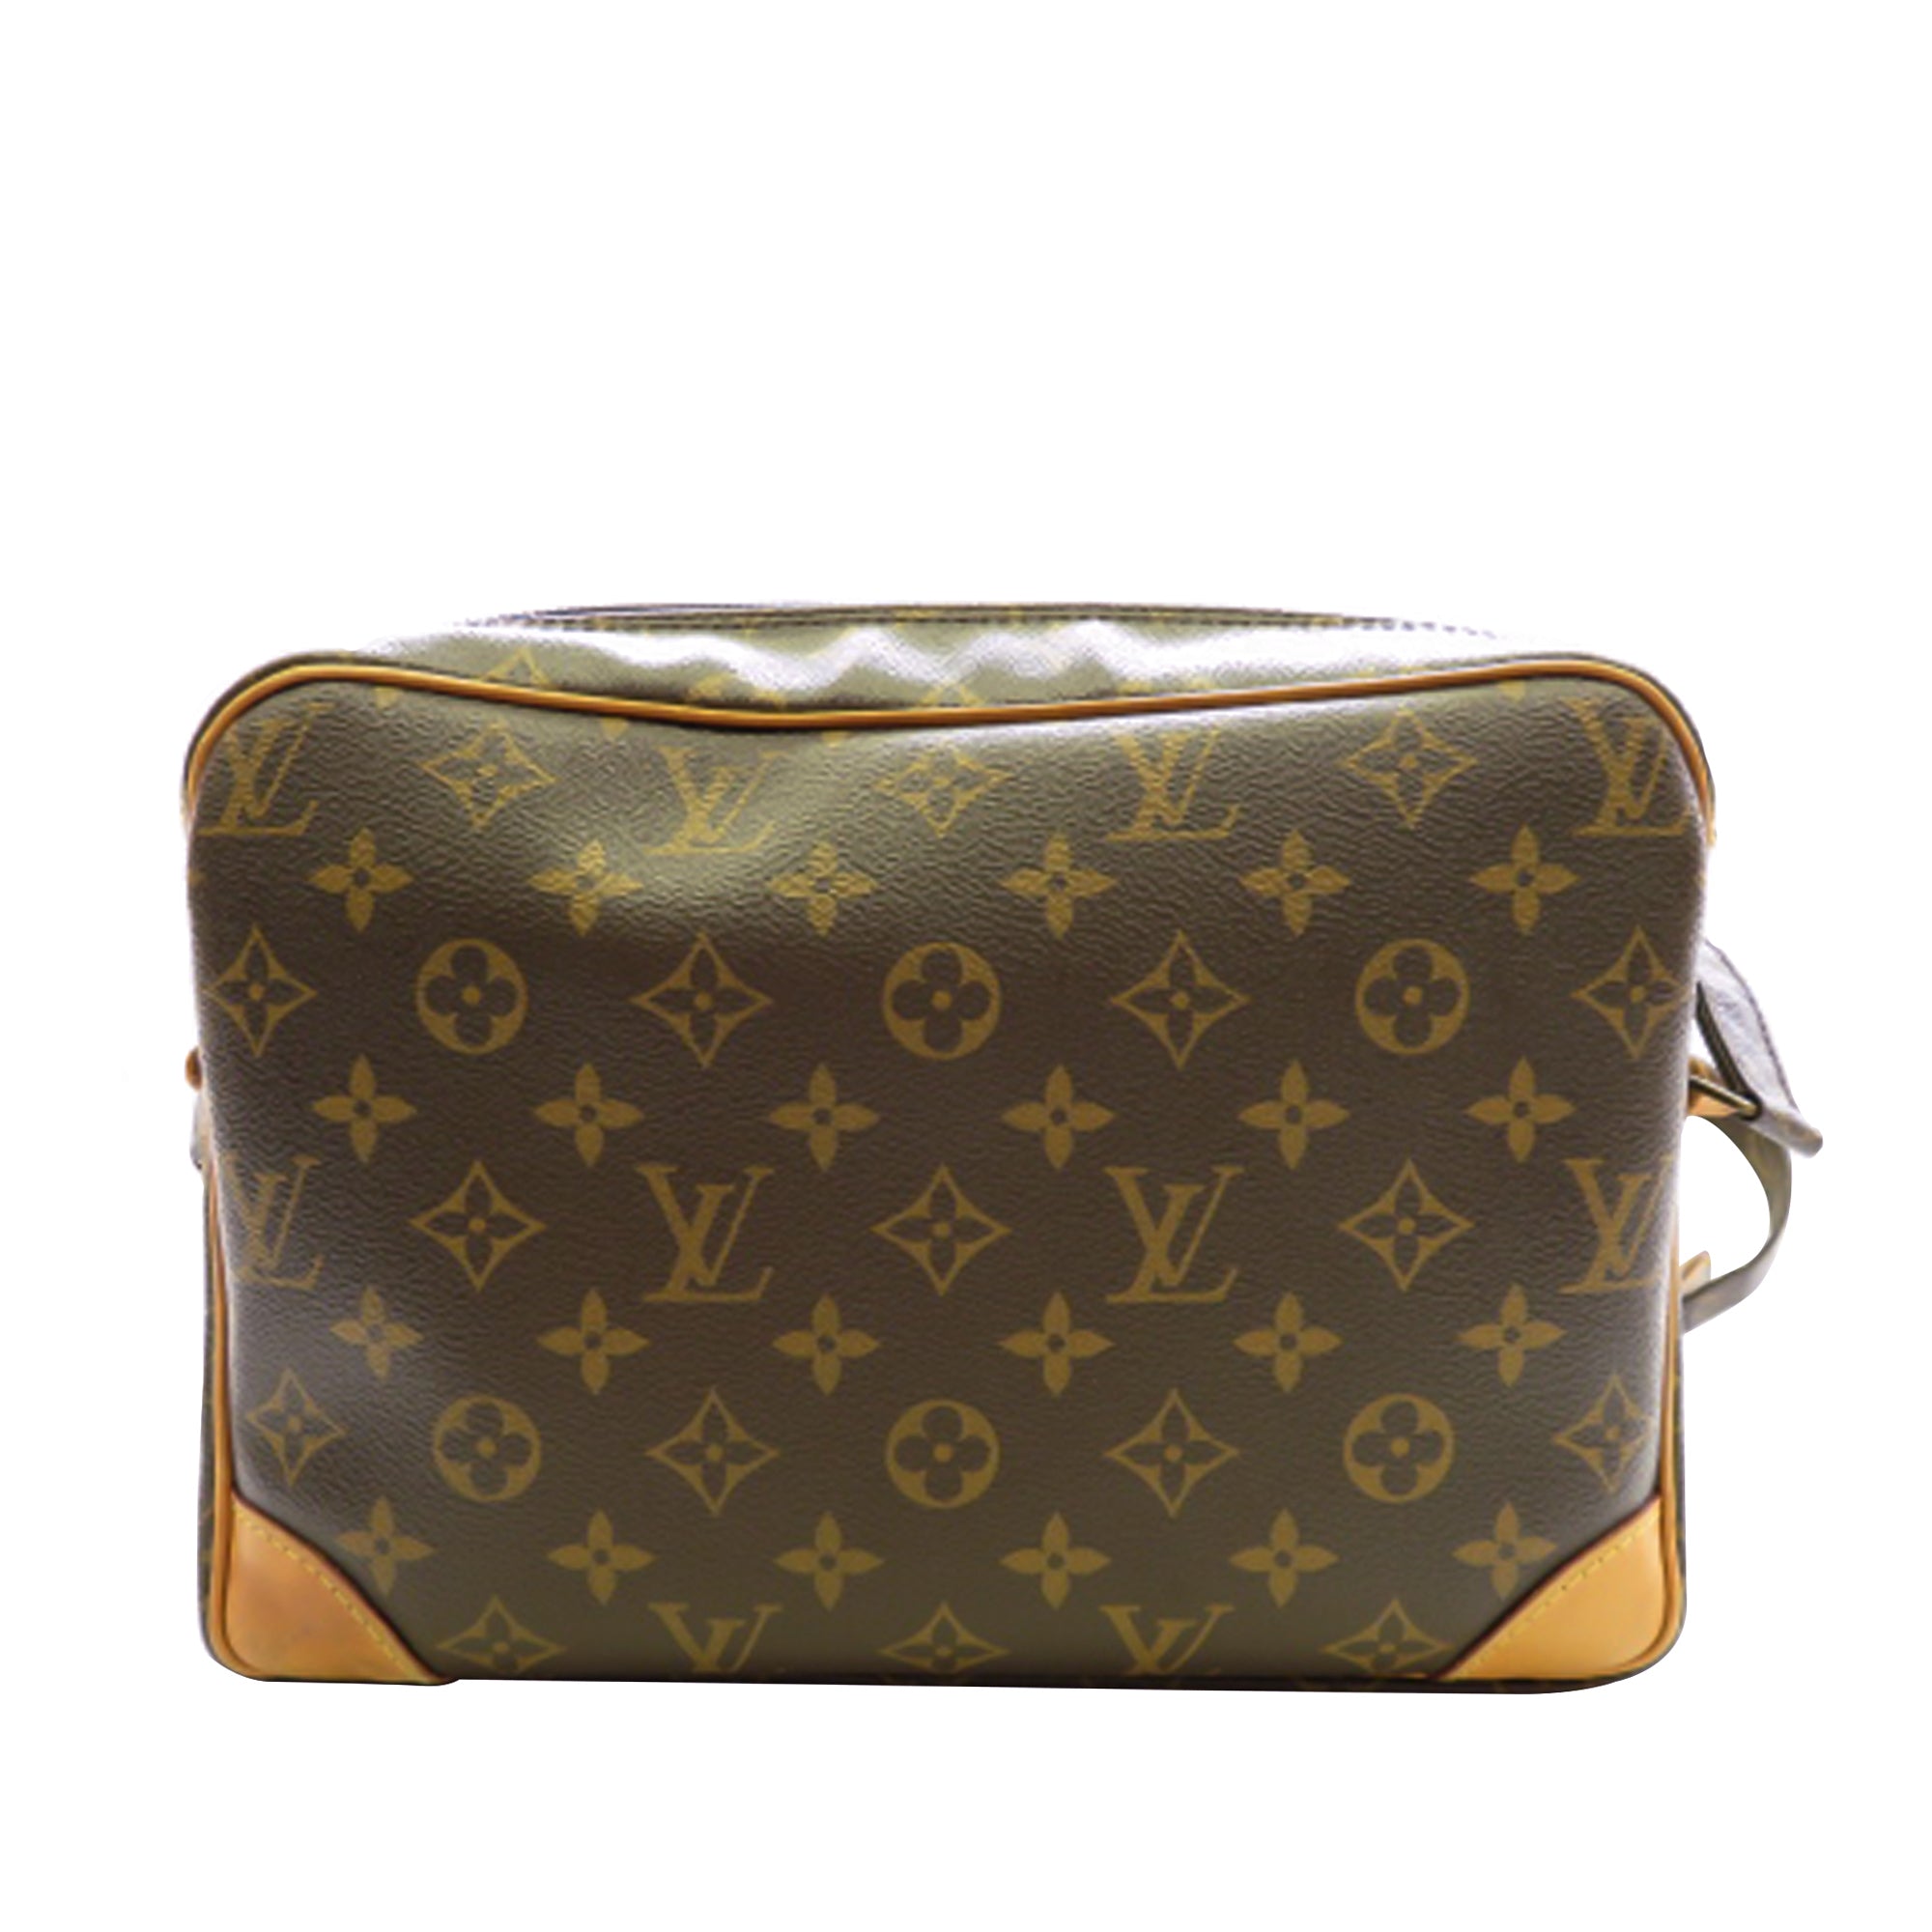 Shop for Louis Vuitton Monogram Canvas Leather Nile GM Shoulder Bag -  Shipped from USA